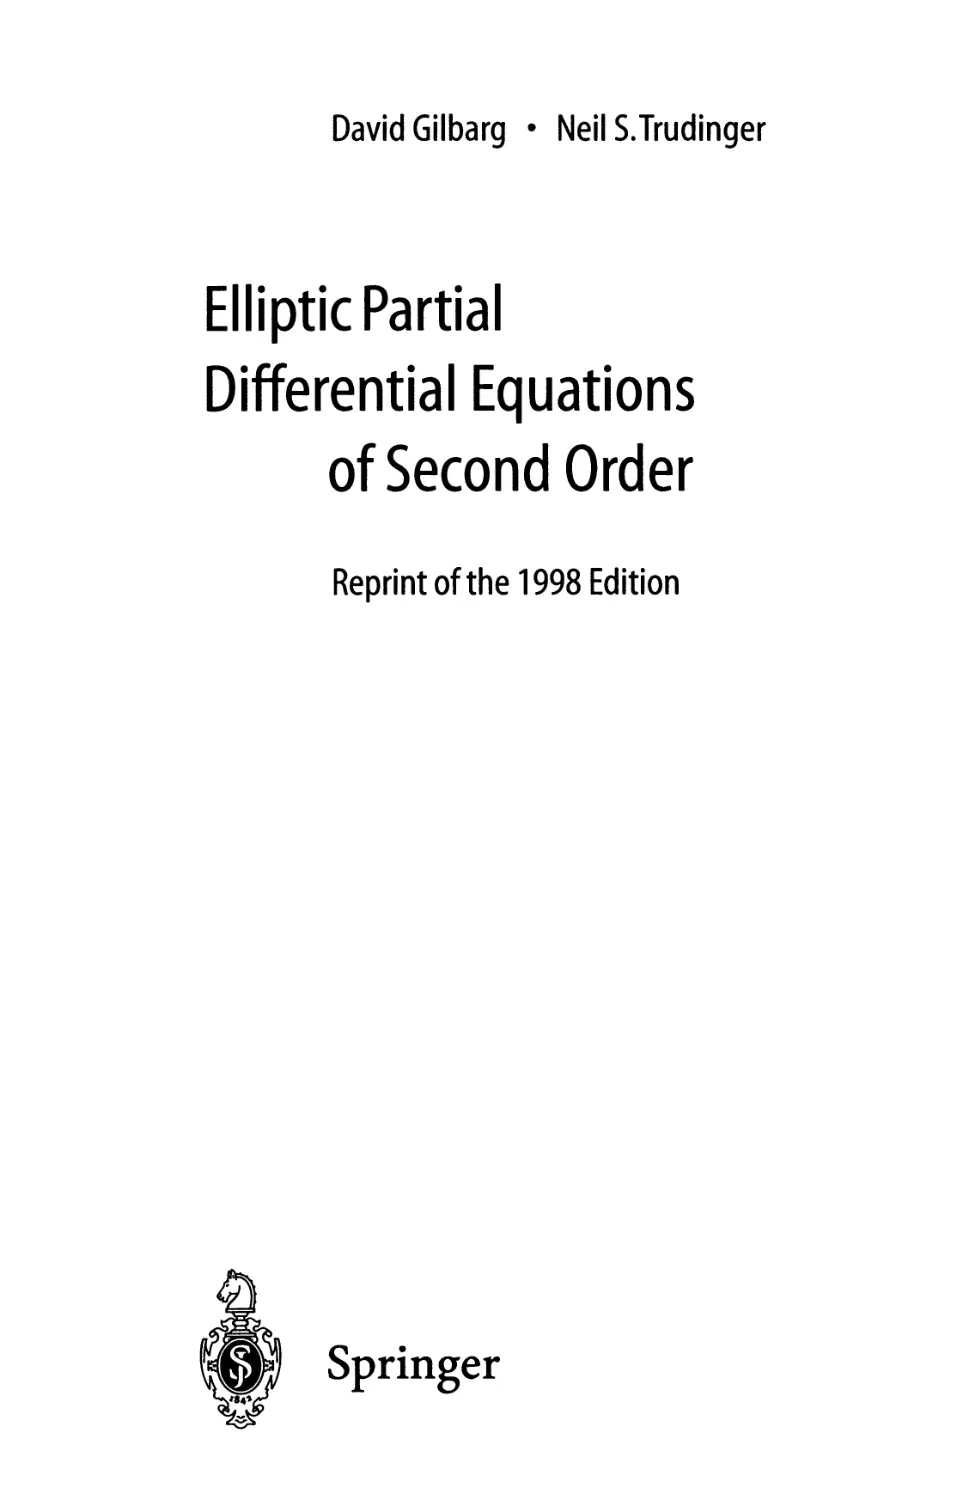 Title: Elliptic Partial Differential Equations of Second Order